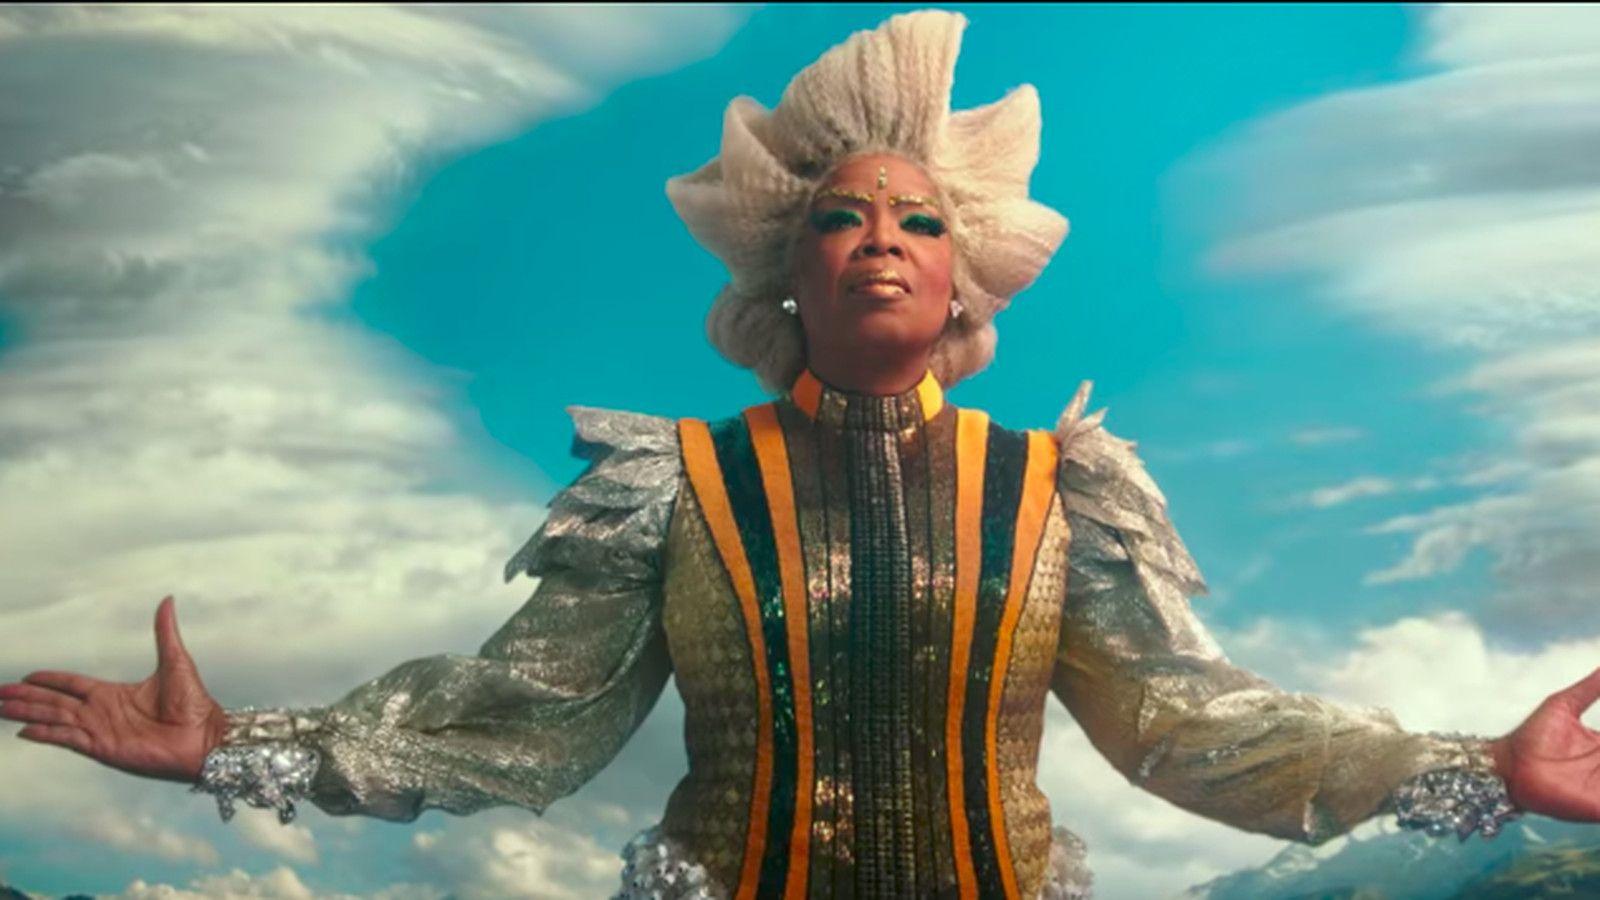 The best part of A Wrinkle in Time's first trailer is Oprah's